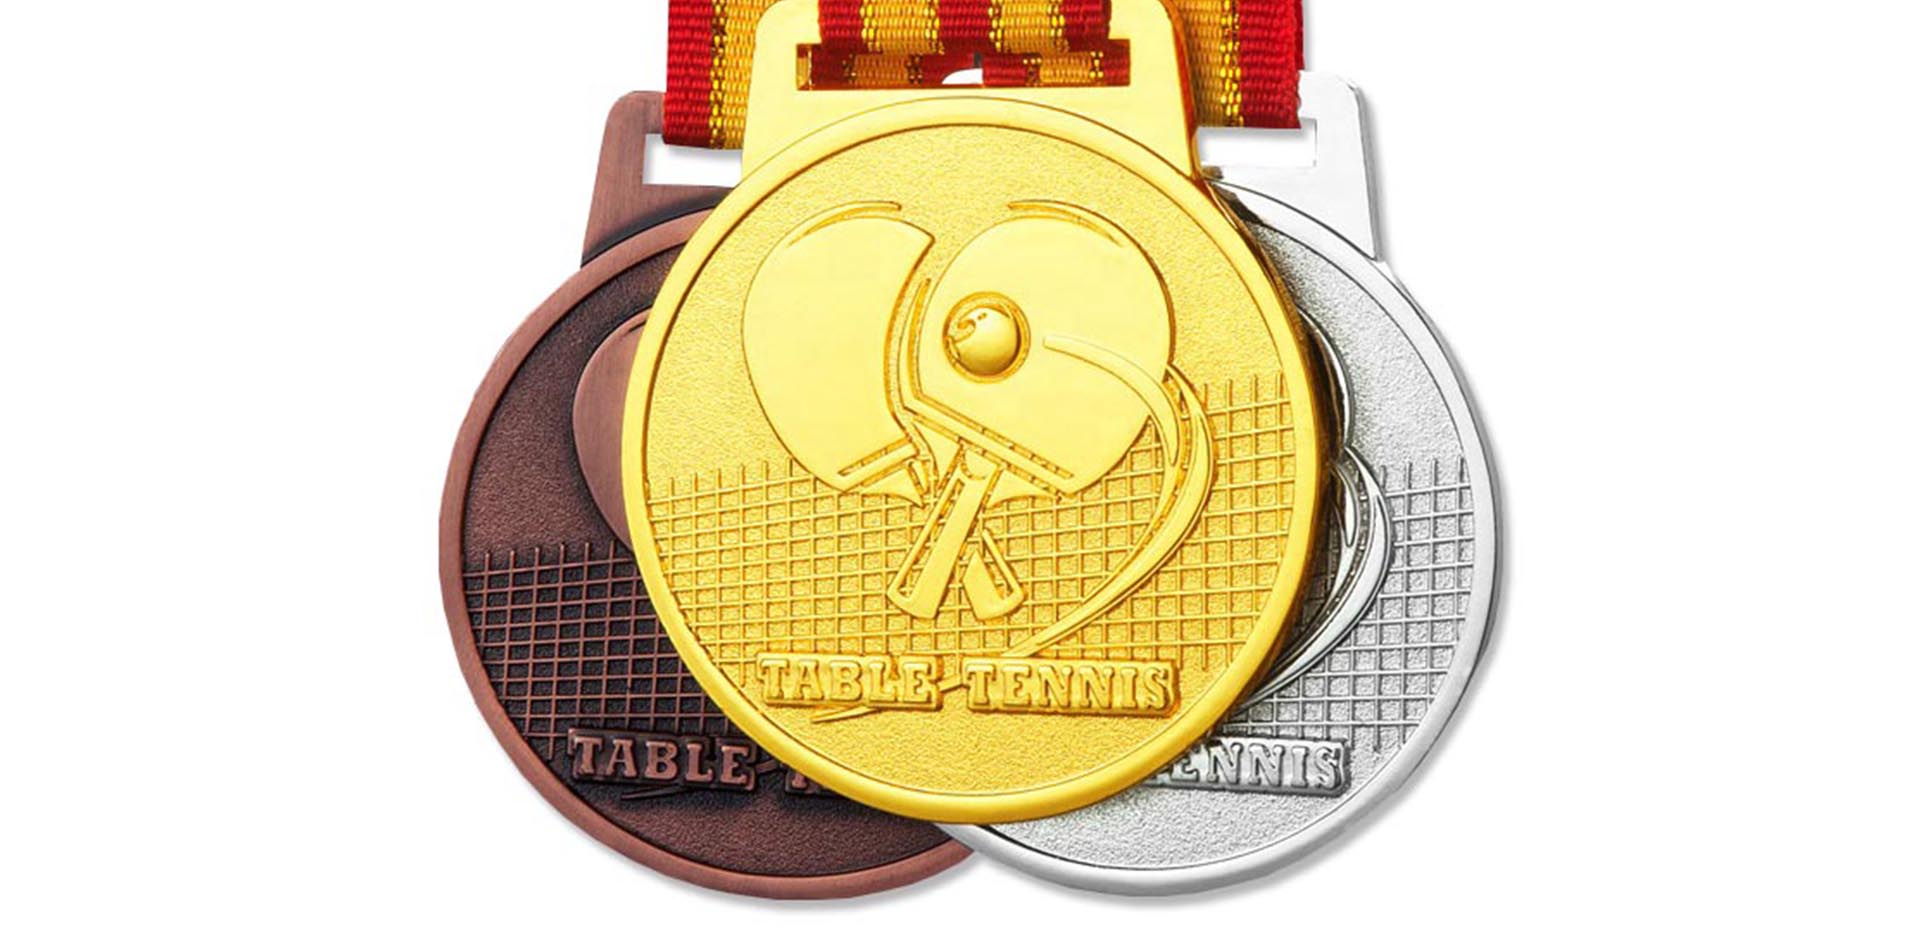 Customizing various medals: We are professional